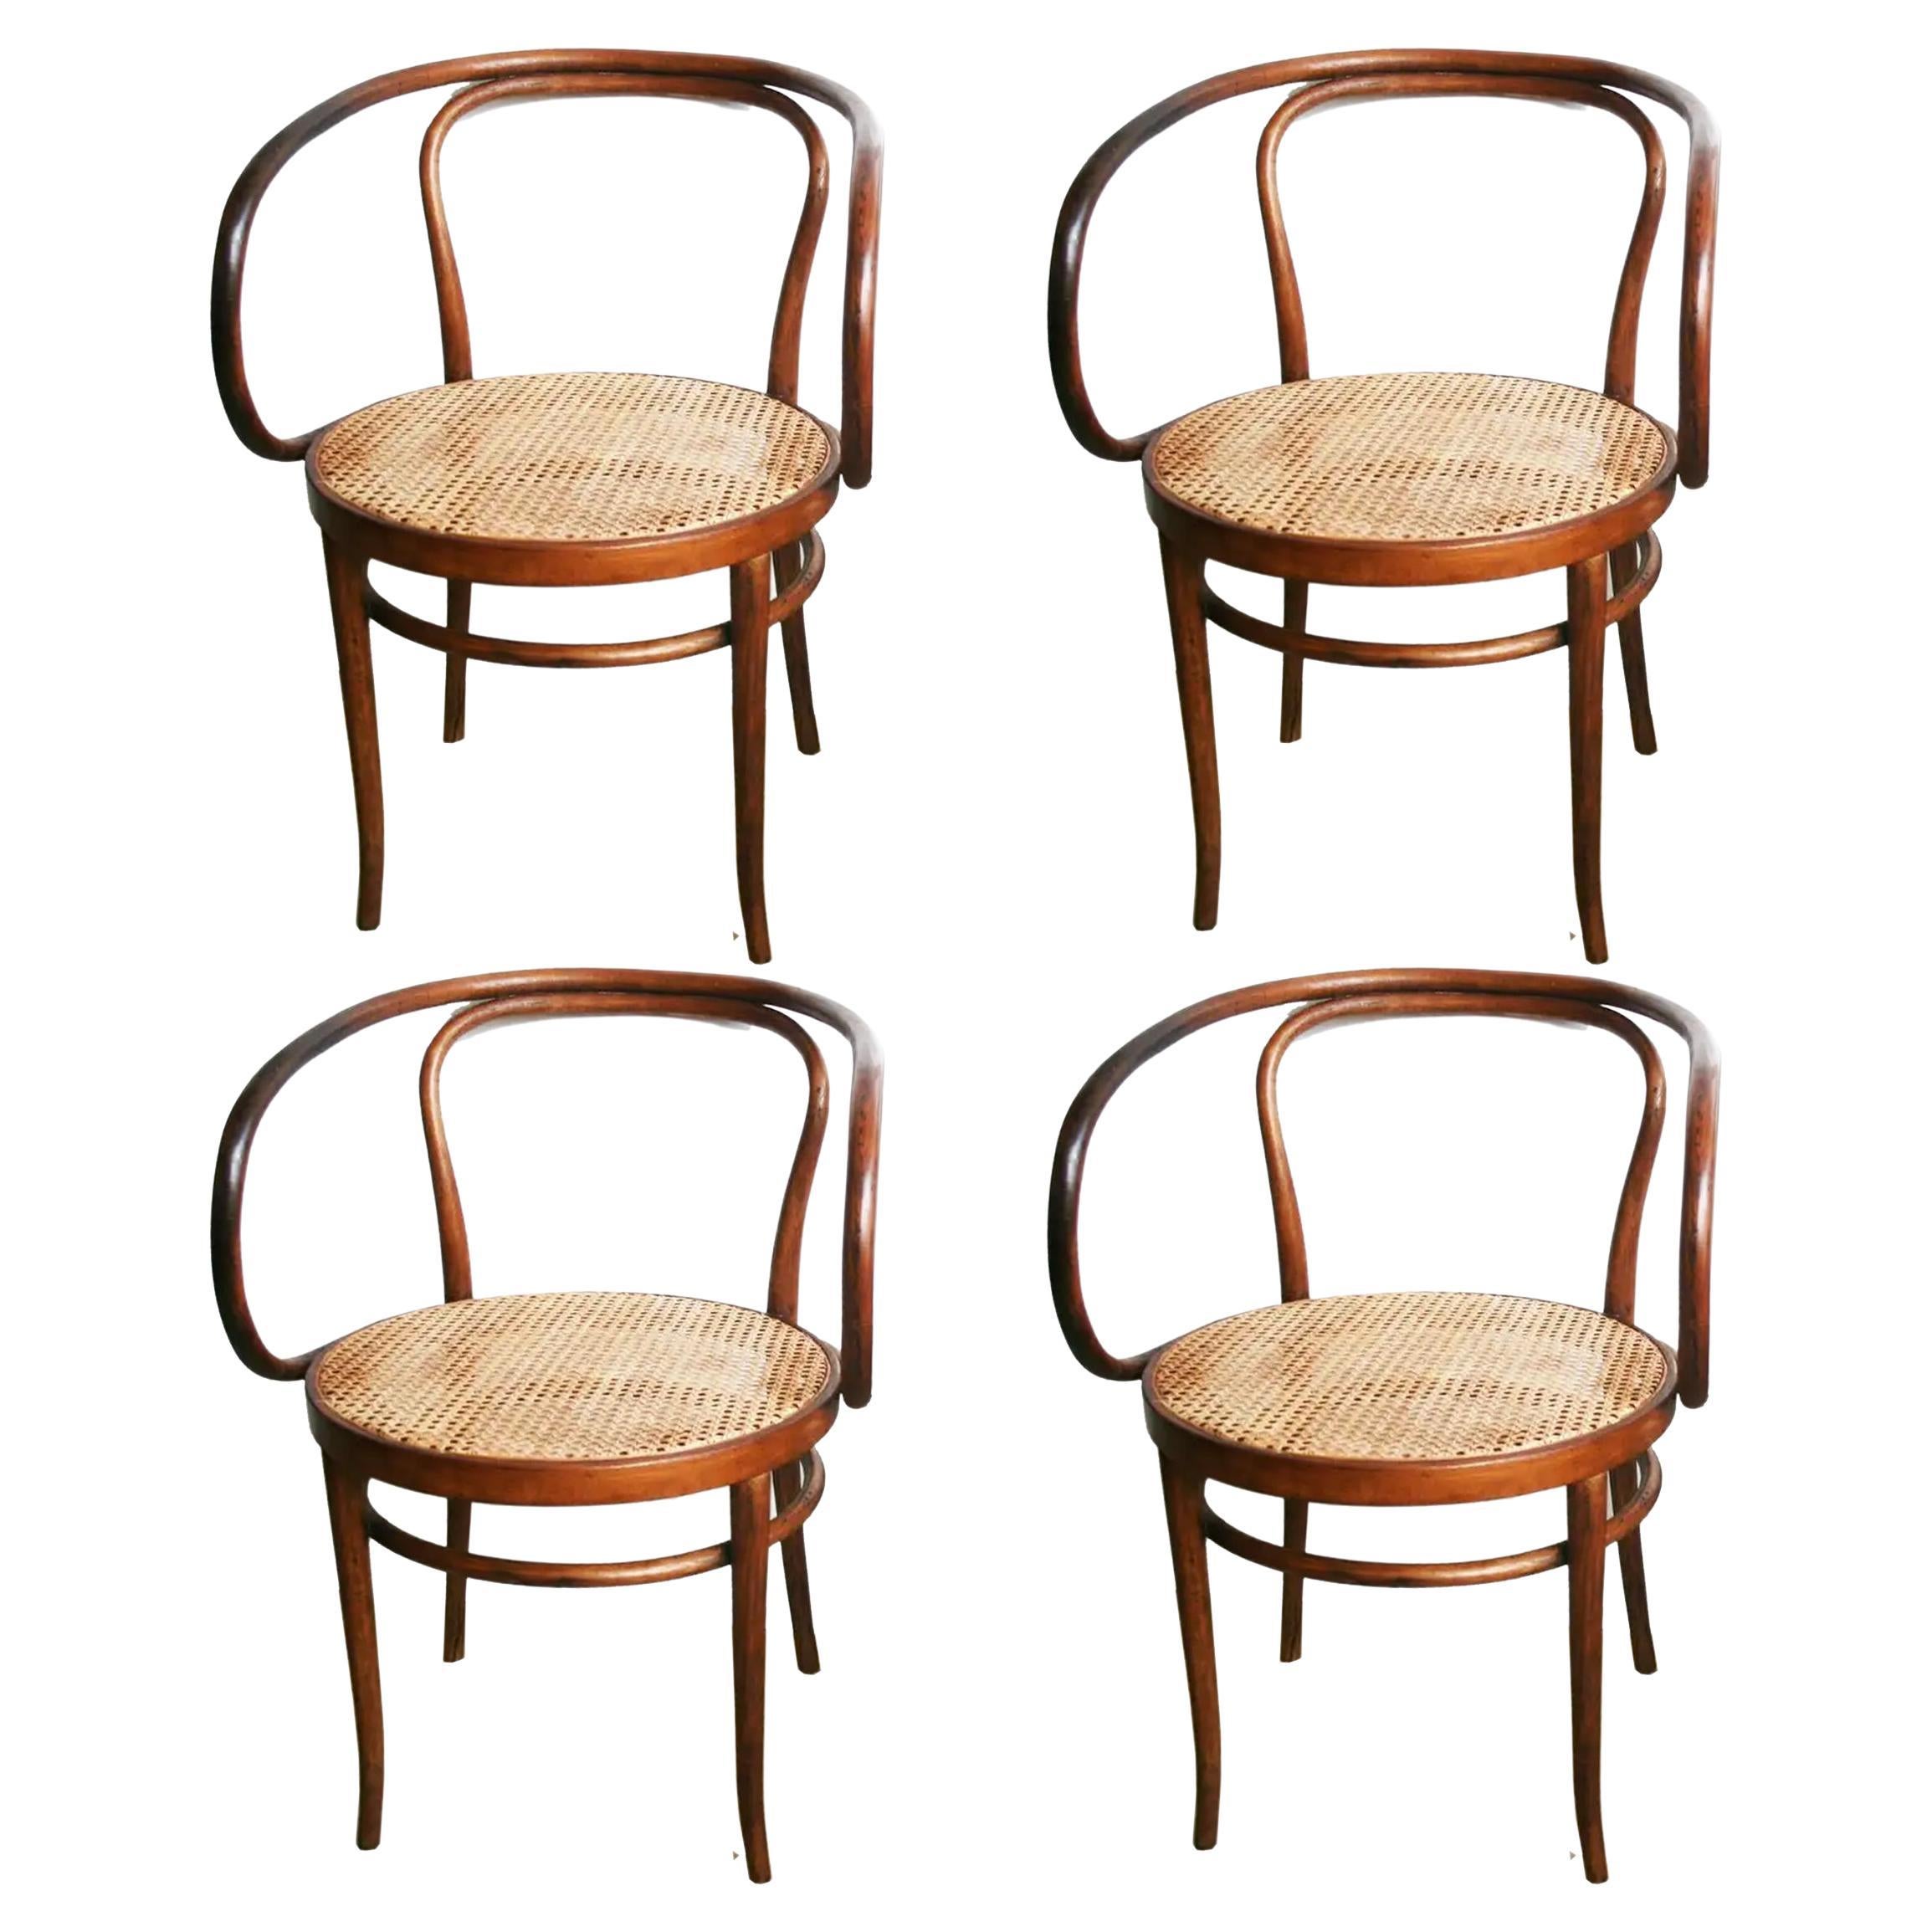 Four Chairs or Archairs  After Thonet  Midcentury  209, Brown Bentwood, 1950s